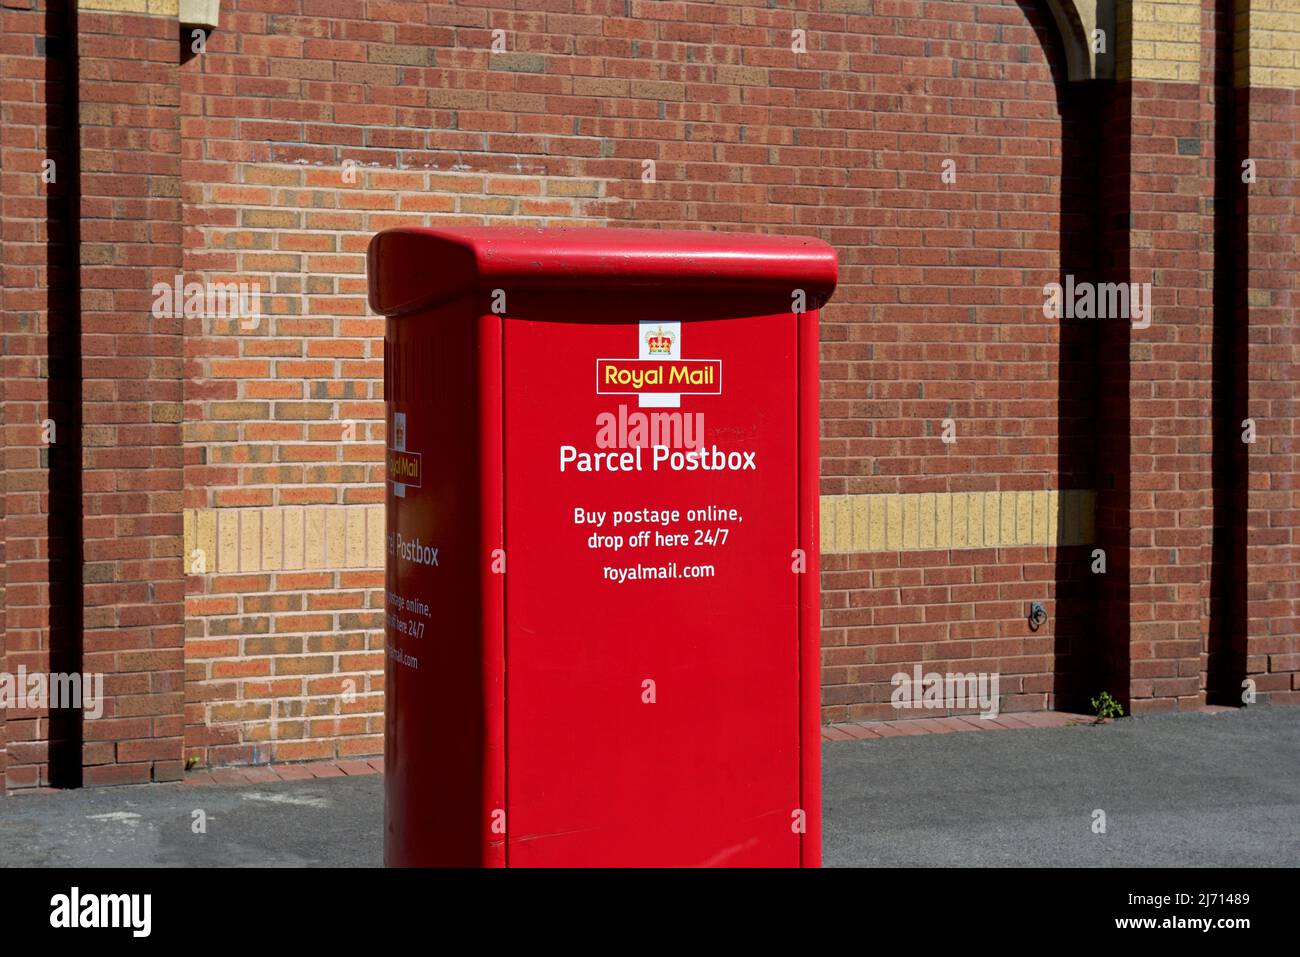 Parcel postbox in England UK Stock Photo